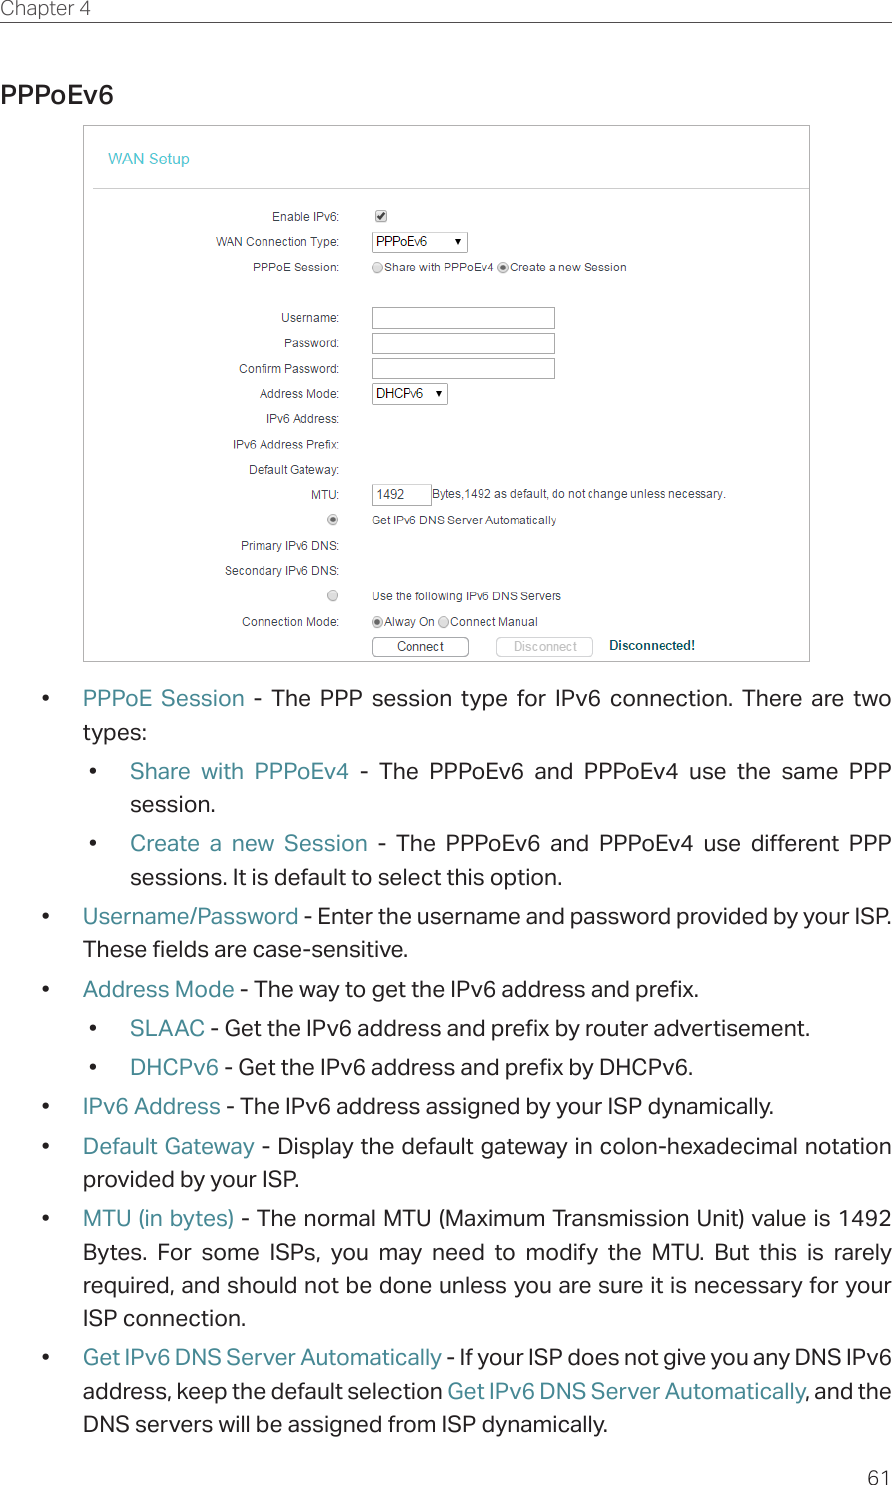 61Chapter 4  PPPoEv6 •  PPPoE Session - The PPP session type for IPv6 connection. There are two types:•  Share with PPPoEv4 - The PPPoEv6 and PPPoEv4 use the same PPP session.•  Create a new Session - The PPPoEv6 and PPPoEv4 use different PPP sessions. It is default to select this option.•  Username/Password - Enter the username and password provided by your ISP. These fields are case-sensitive.•  Address Mode - The way to get the IPv6 address and prefix. •  SLAAC - Get the IPv6 address and prefix by router advertisement. •  DHCPv6 - Get the IPv6 address and prefix by DHCPv6. •  IPv6 Address - The IPv6 address assigned by your ISP dynamically.•  Default Gateway - Display the default gateway in colon-hexadecimal notation provided by your ISP.•  MTU (in bytes) - The normal MTU (Maximum Transmission Unit) value is 1492 Bytes. For some ISPs, you may need to modify the MTU. But this is rarely required, and should not be done unless you are sure it is necessary for your ISP connection.•  Get IPv6 DNS Server Automatically - If your ISP does not give you any DNS IPv6 address, keep the default selection Get IPv6 DNS Server Automatically, and the DNS servers will be assigned from ISP dynamically.